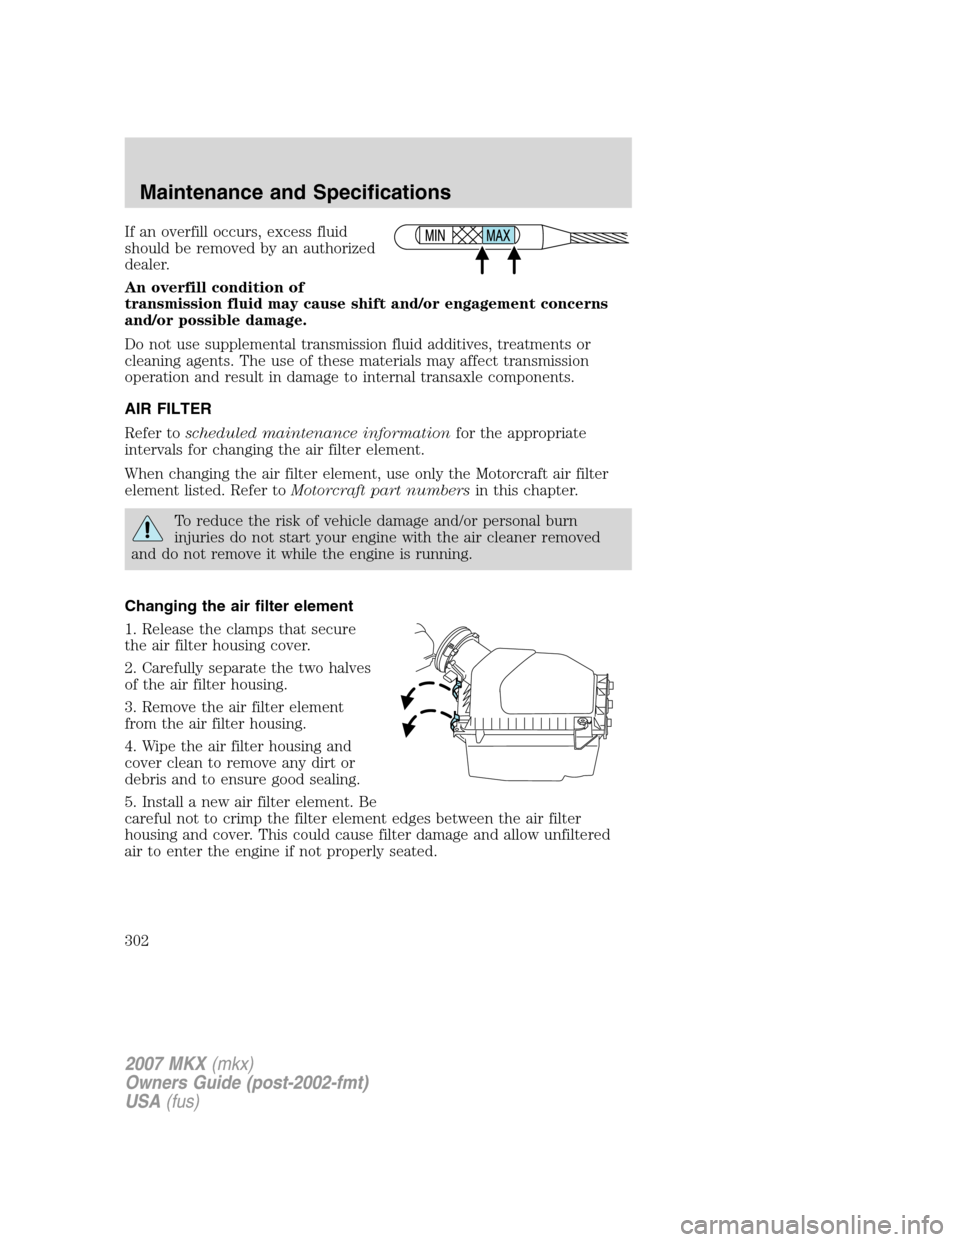 LINCOLN MKX 2007 User Guide If an overfill occurs, excess fluid
should be removed by an authorized
dealer.
An overfill condition of
transmission fluid may cause shift and/or engagement concerns
and/or possible damage.
Do not use